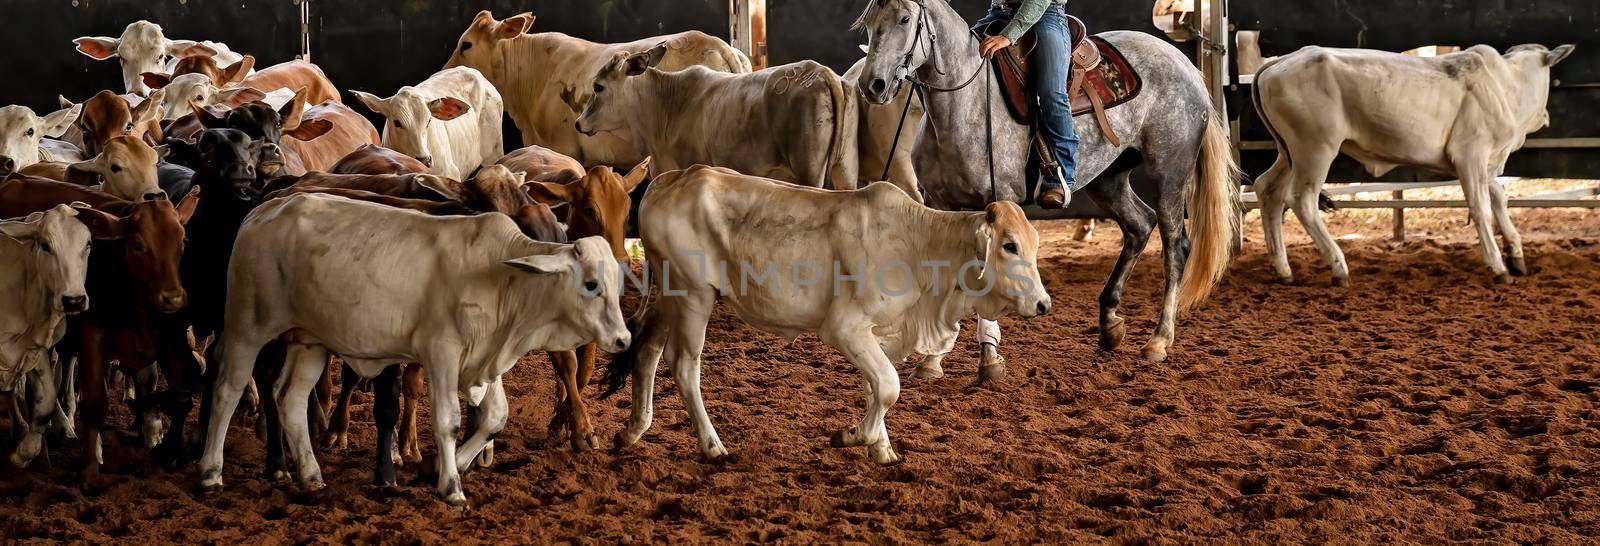 A horse and rider herding calves in a western style equestrian cutting competition